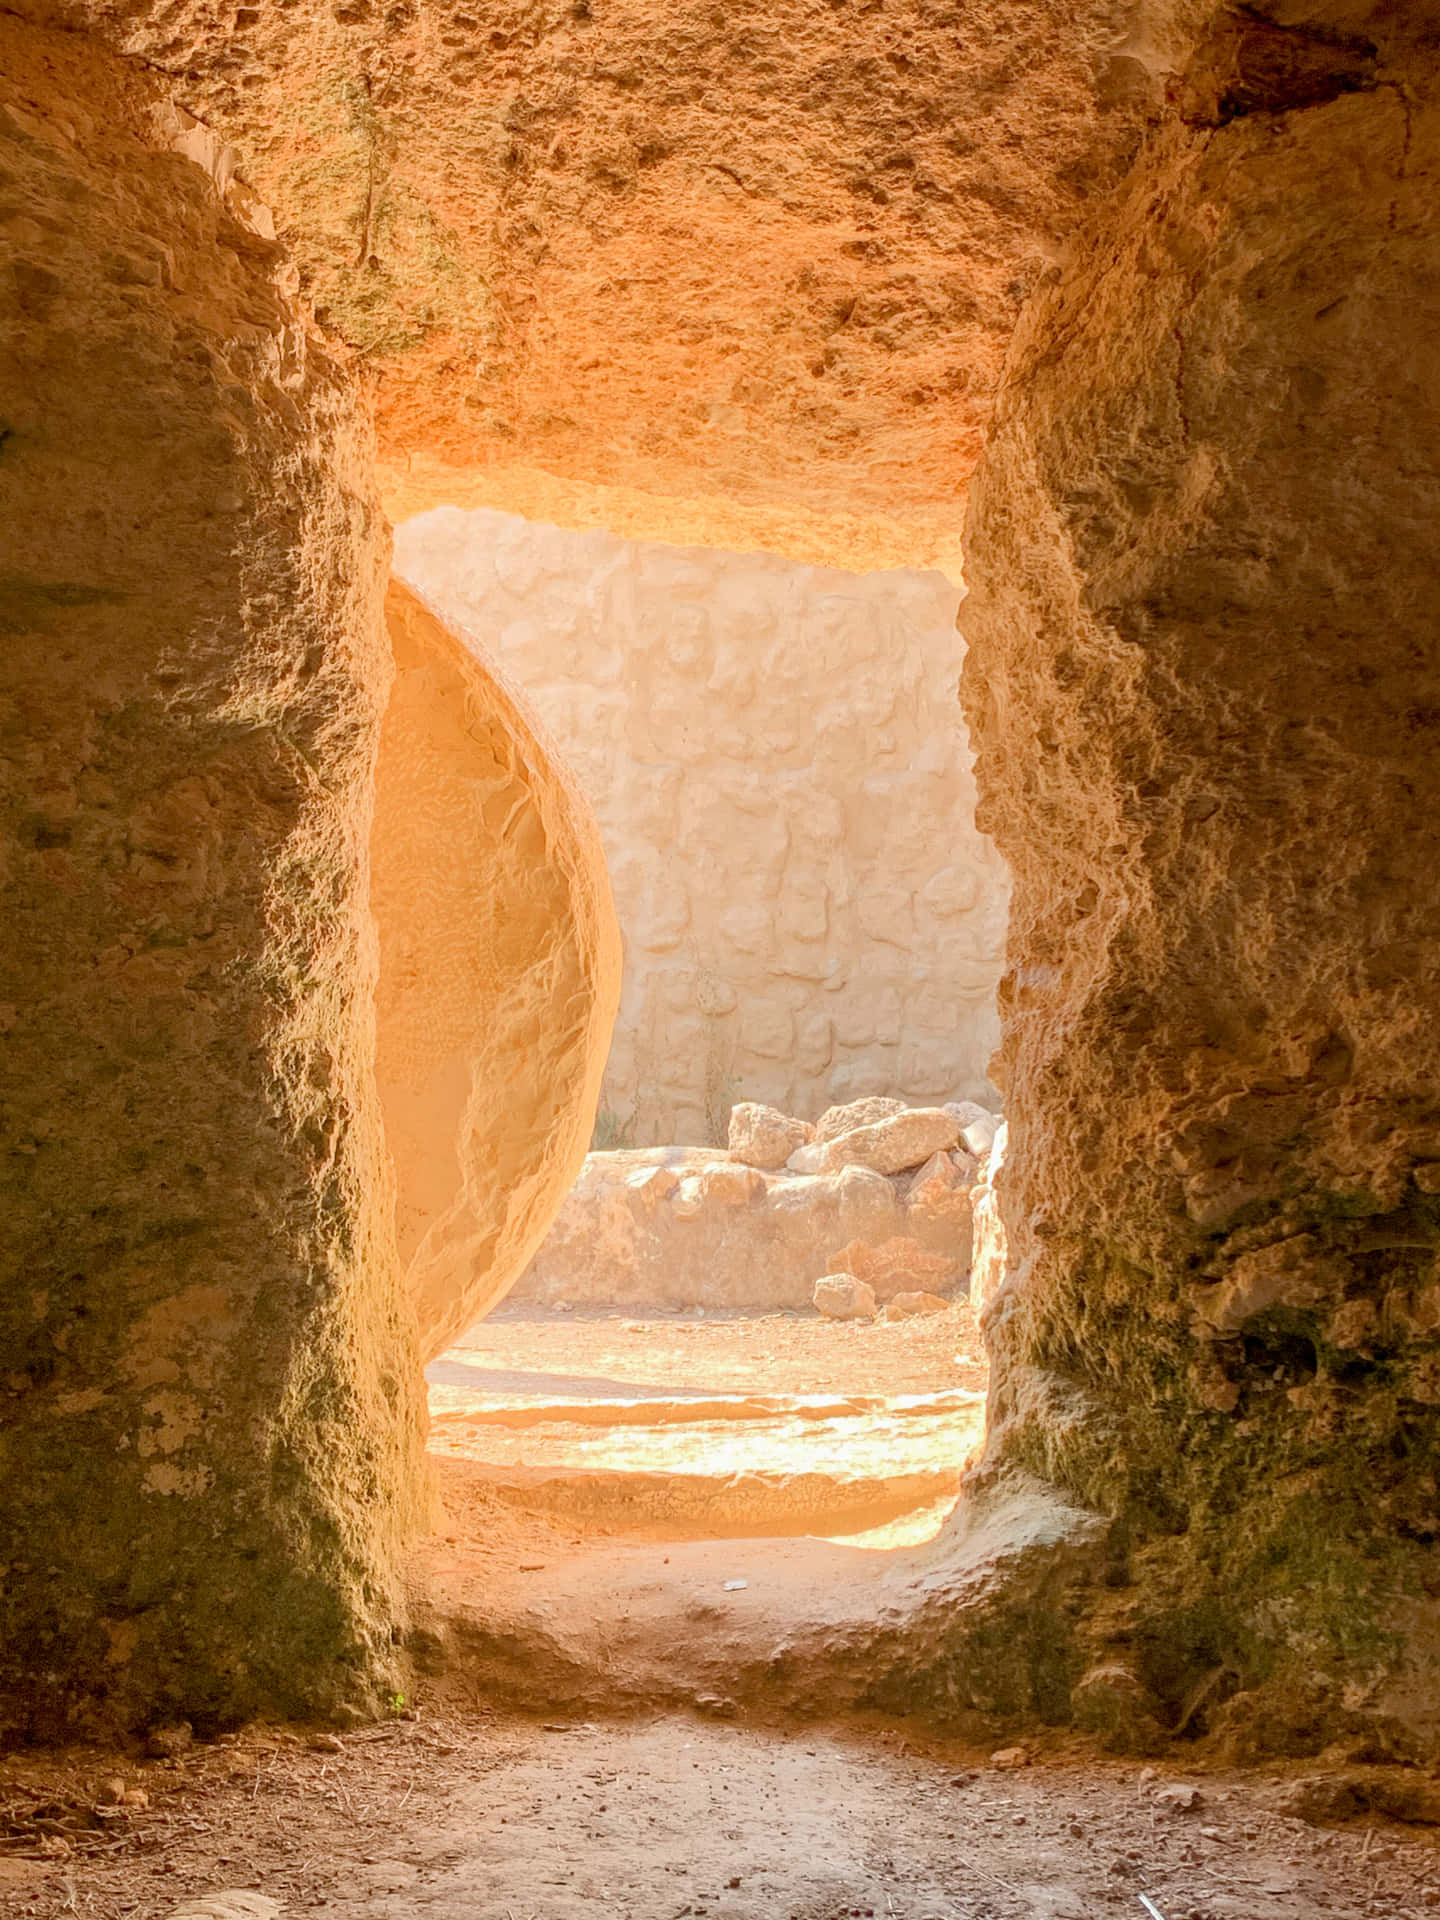 Embrace renewal and hope with Empty Tomb Wallpaper